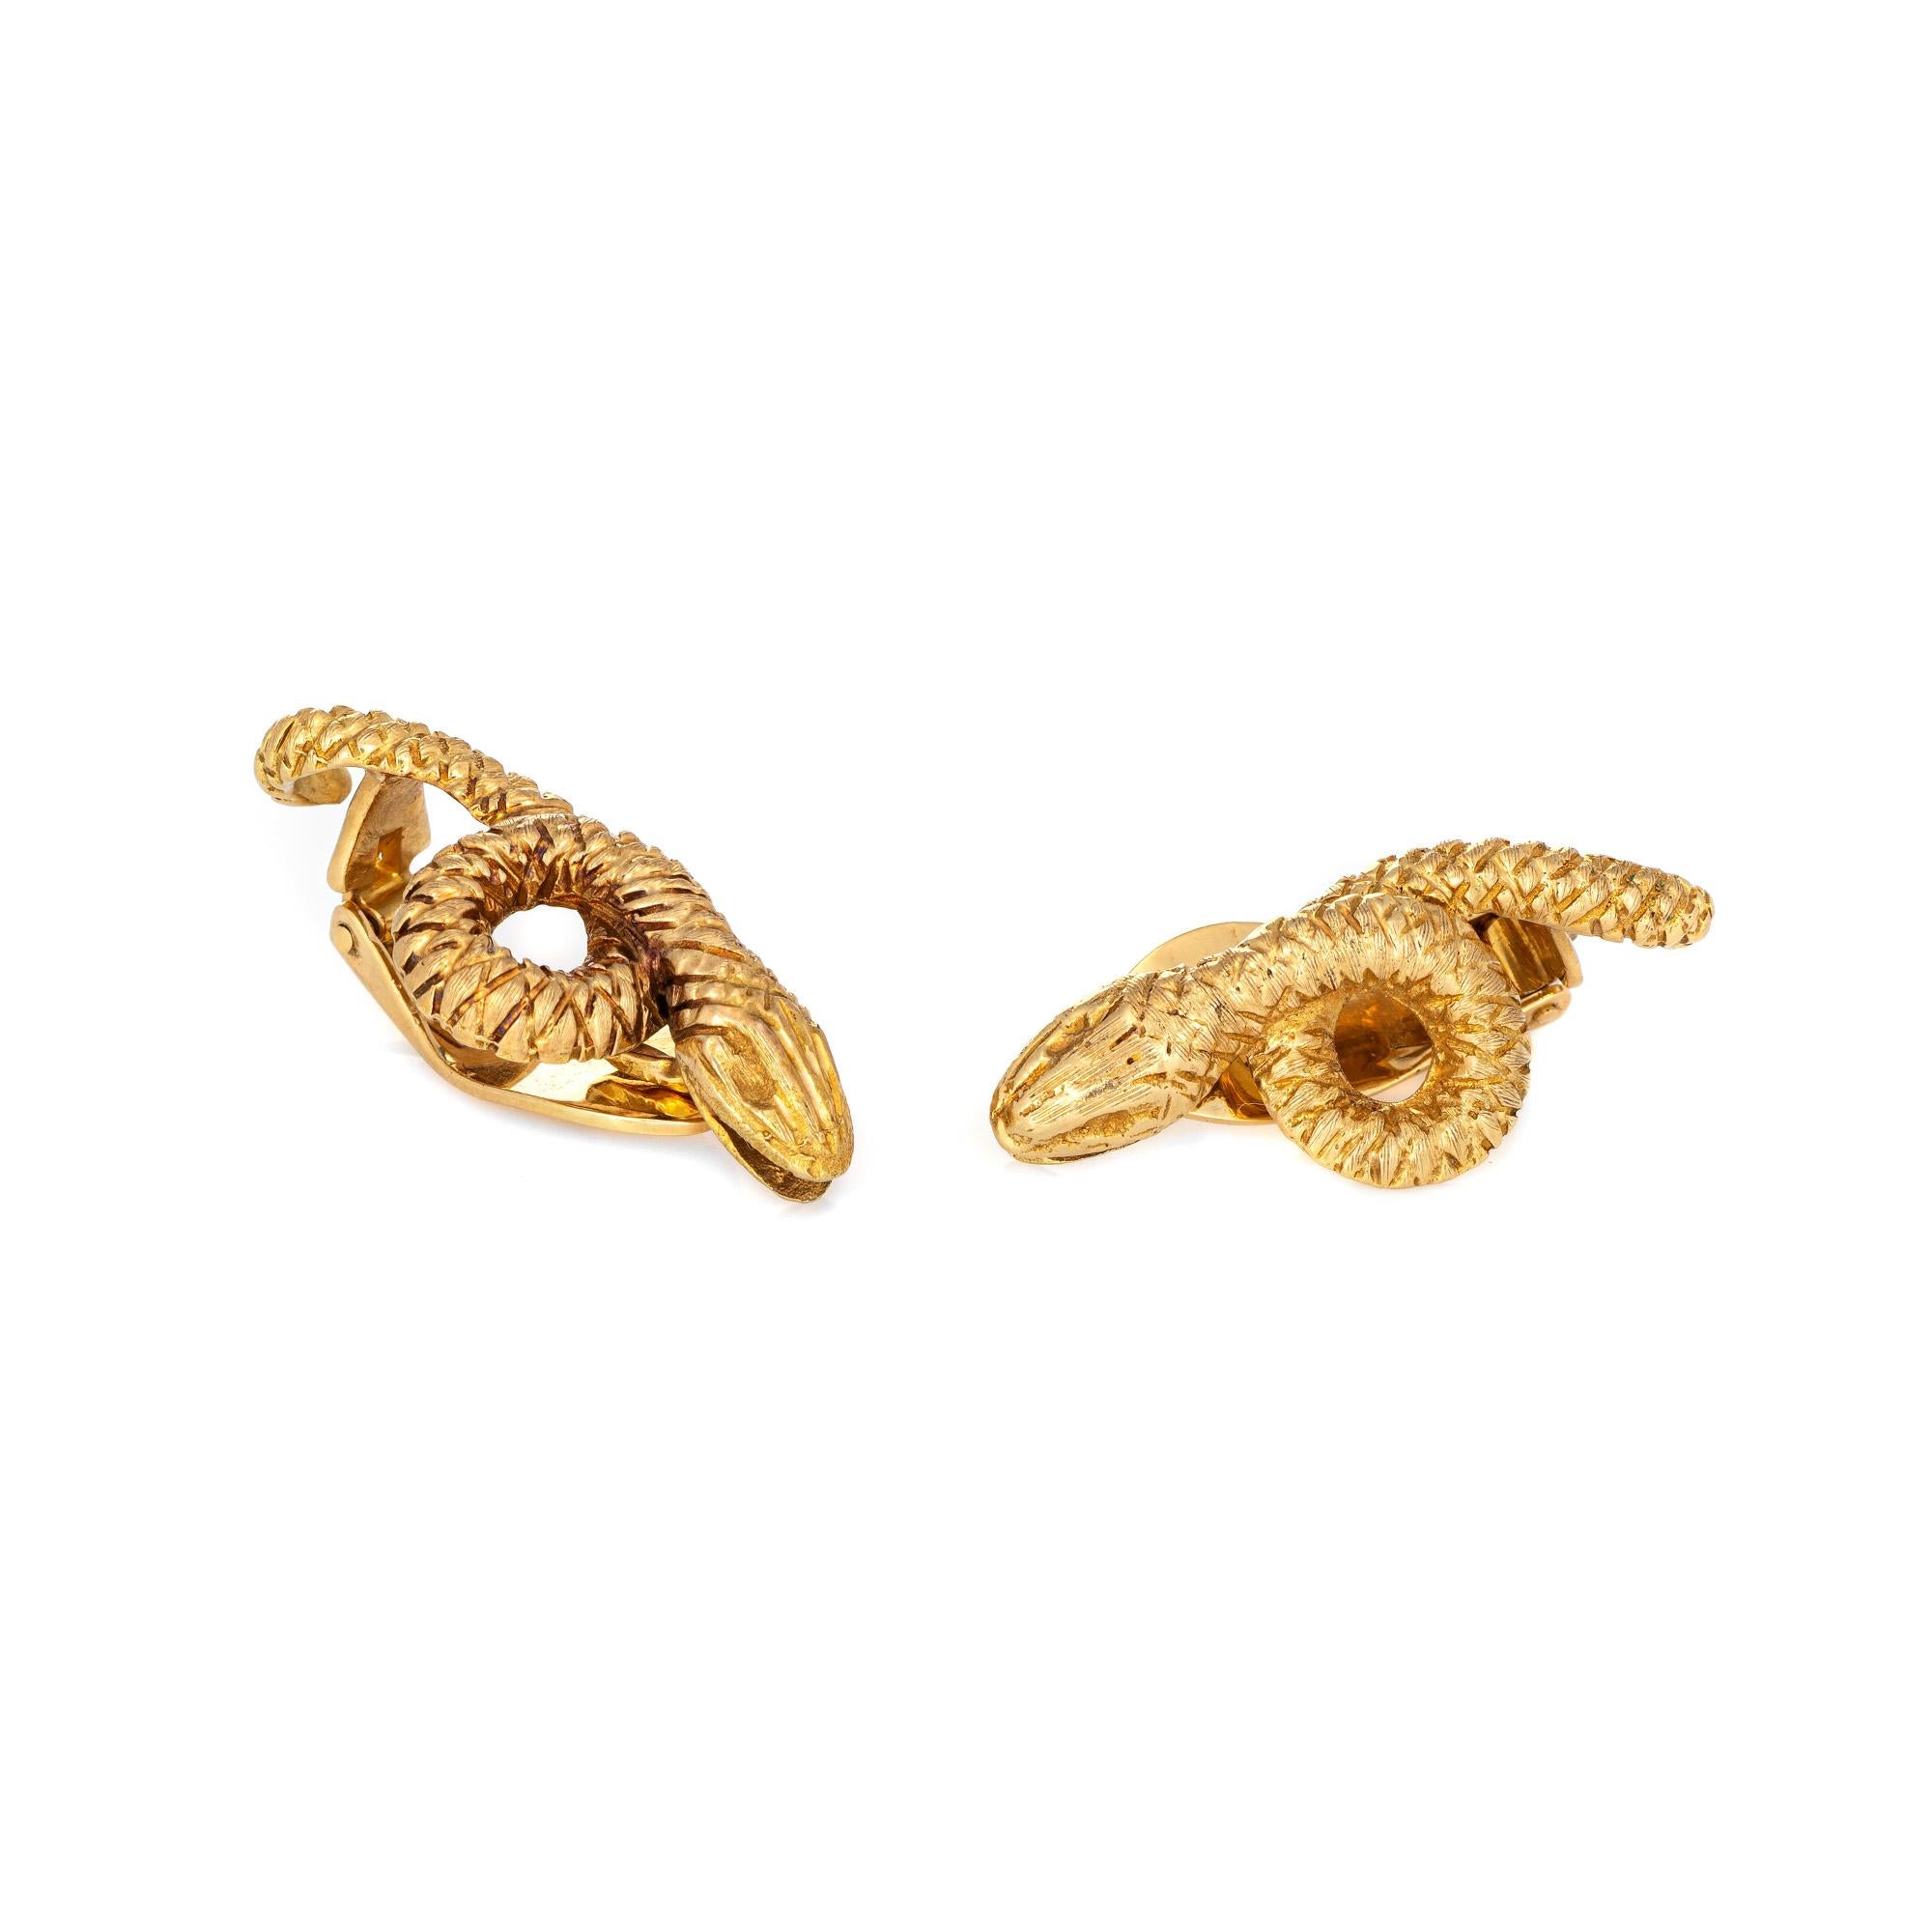 Stylish Ilias Lalaounis snake earrings crafted in 18 karat yellow gold. 

The finely detailed and bold earrings feature snakes coiled with textured scale like detail to the body. Greek jeweler Ilias Lalaounis was a pioneer and globally renowned